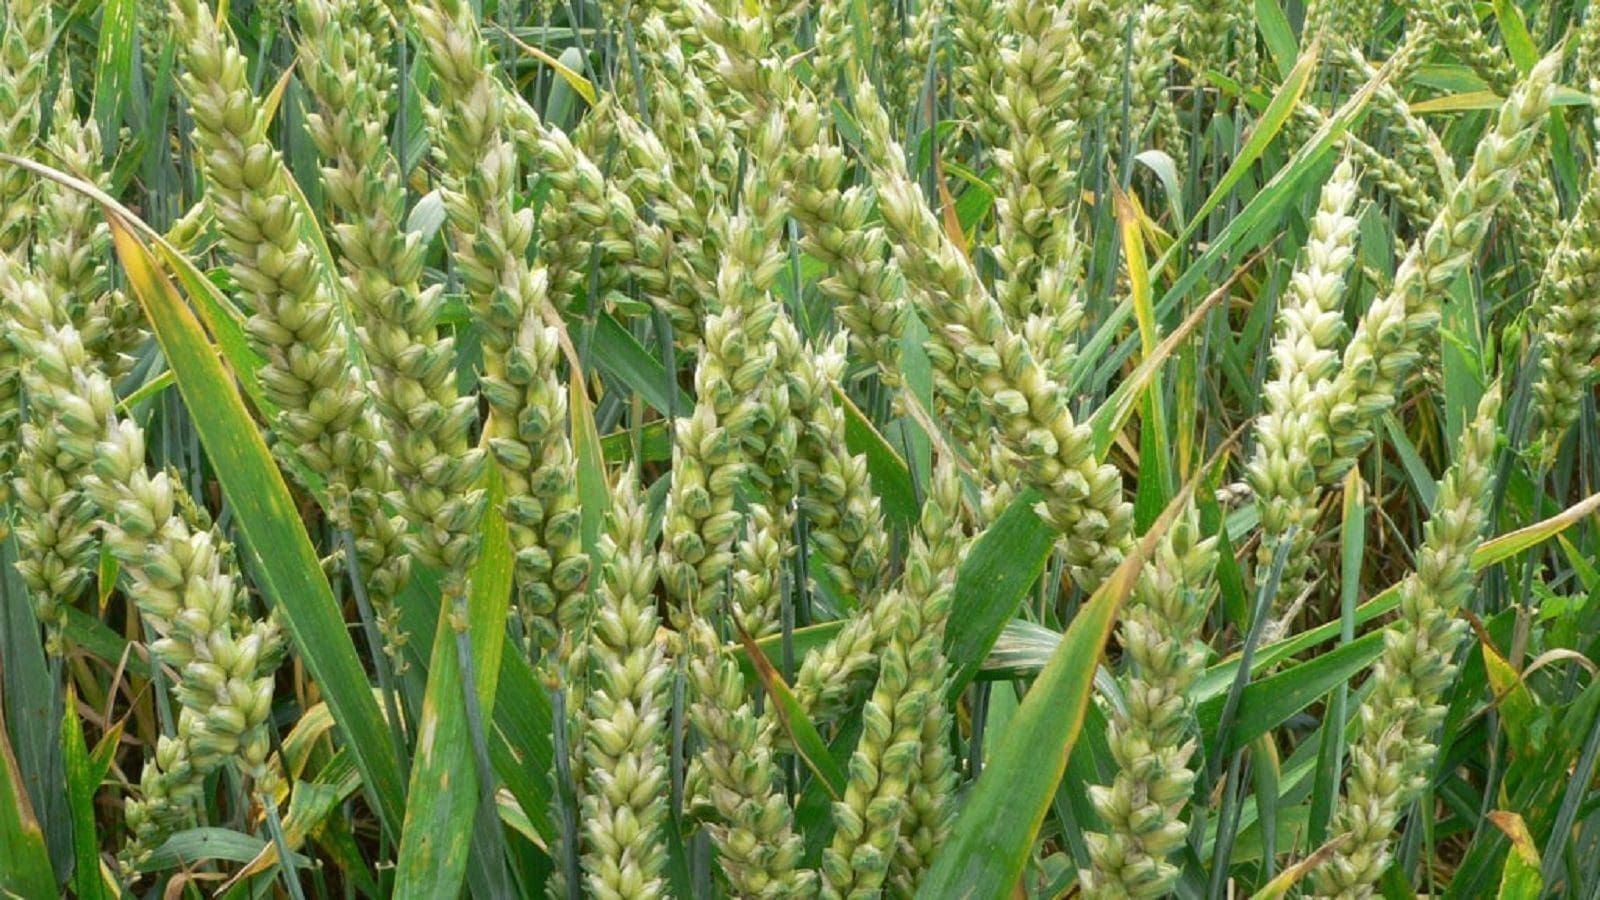 Panel forecasts 16.5% decline in soft red winter wheat production